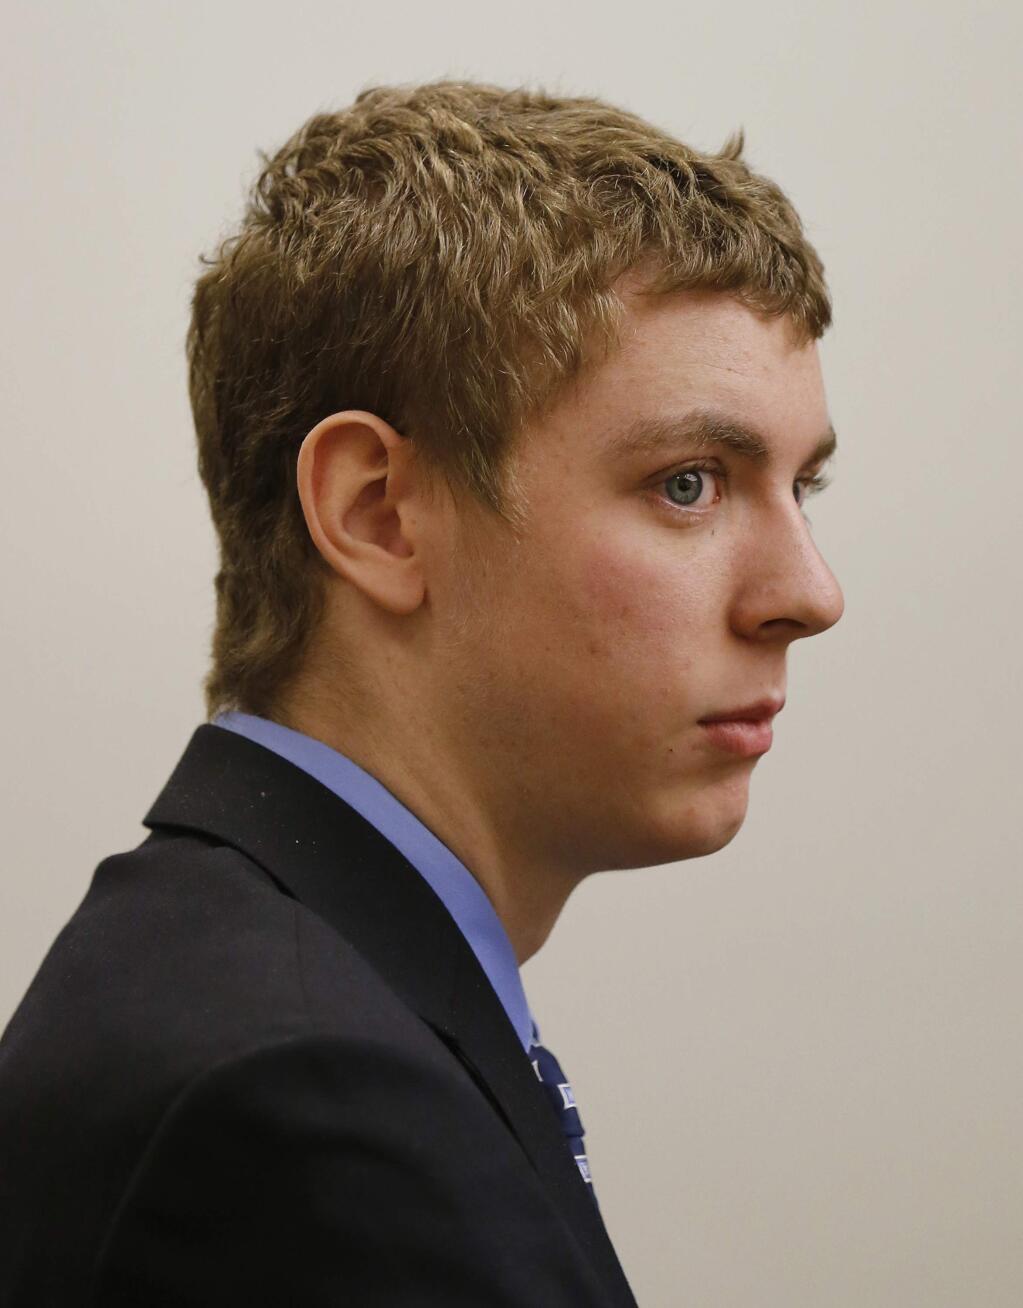 In this March 30, 2015 photo, Brock Turner appears in the Palo Alto, Calif., branch of Santa Clara County Superior Court court for a status hearing. A California judge under fire for a light sentence given to a Stanford University swimmer has recused himself from making his first key decision in another sex crimes case. The judge is the target of a recall campaign that started in June after he sentenced former Stanford swimmer Brock Turner, 20, to six months in jail for sexually assaulting an intoxicated woman who passed out behind a trash bin after a fraternity party. (Gary Reyes/San Jose Mercury News via AP, File) MANDATORY CREDIT